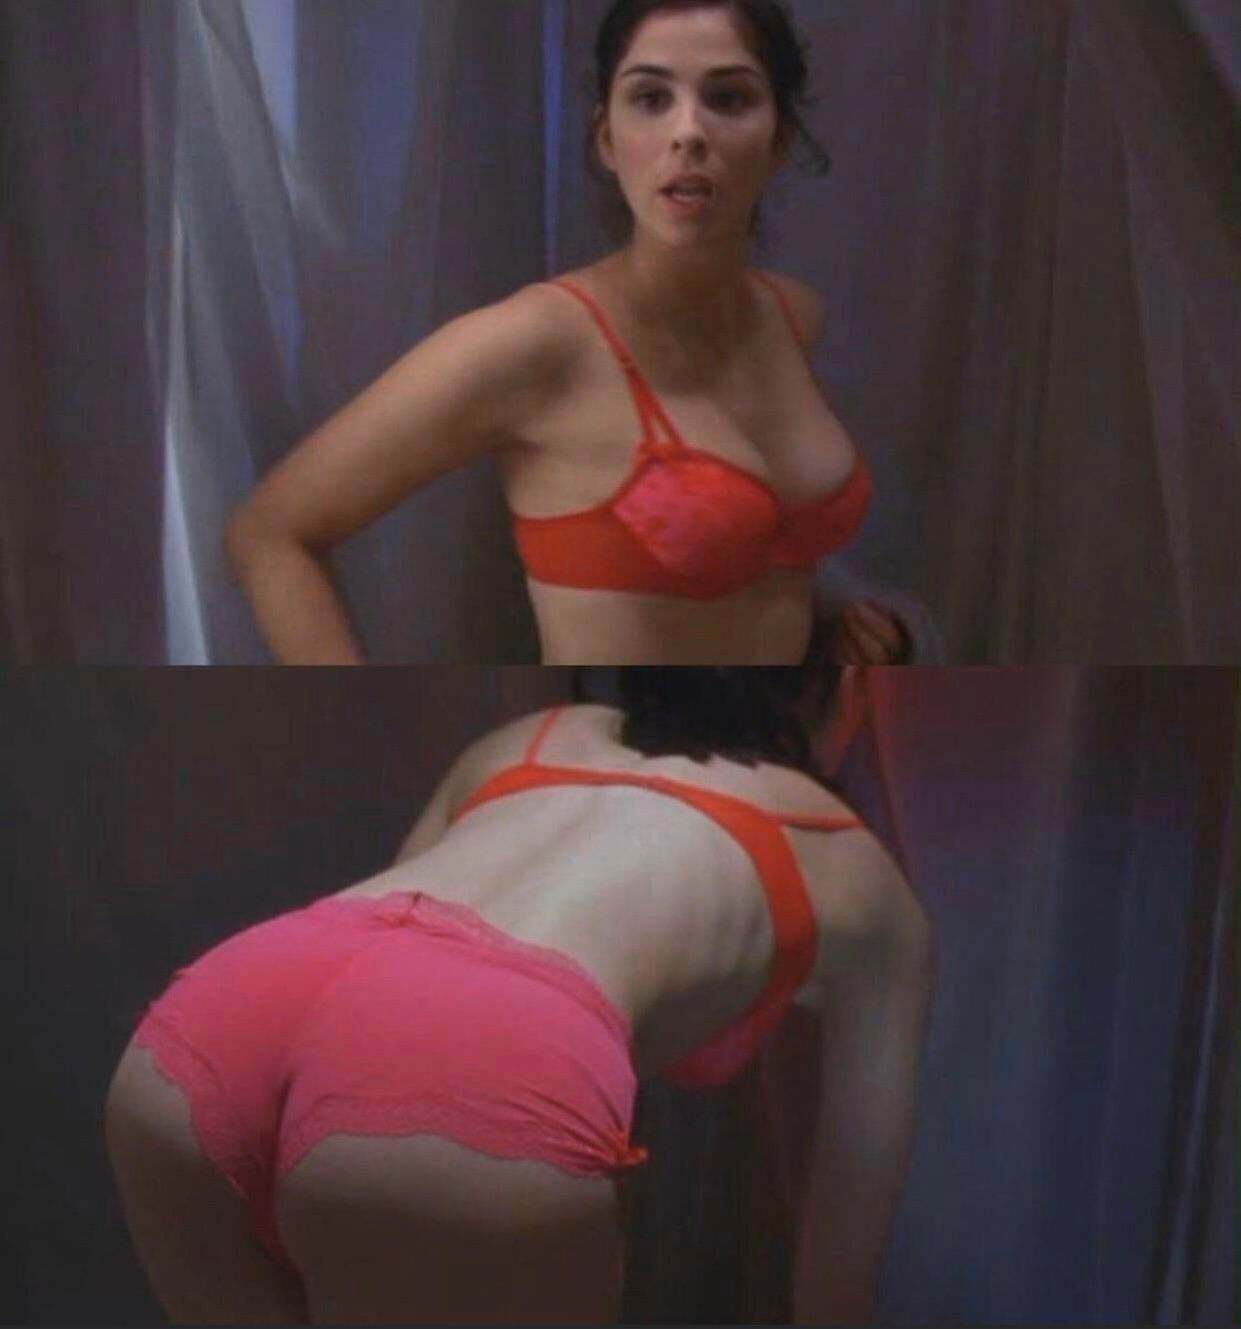 Sarah Silverman would be an amazing fuck